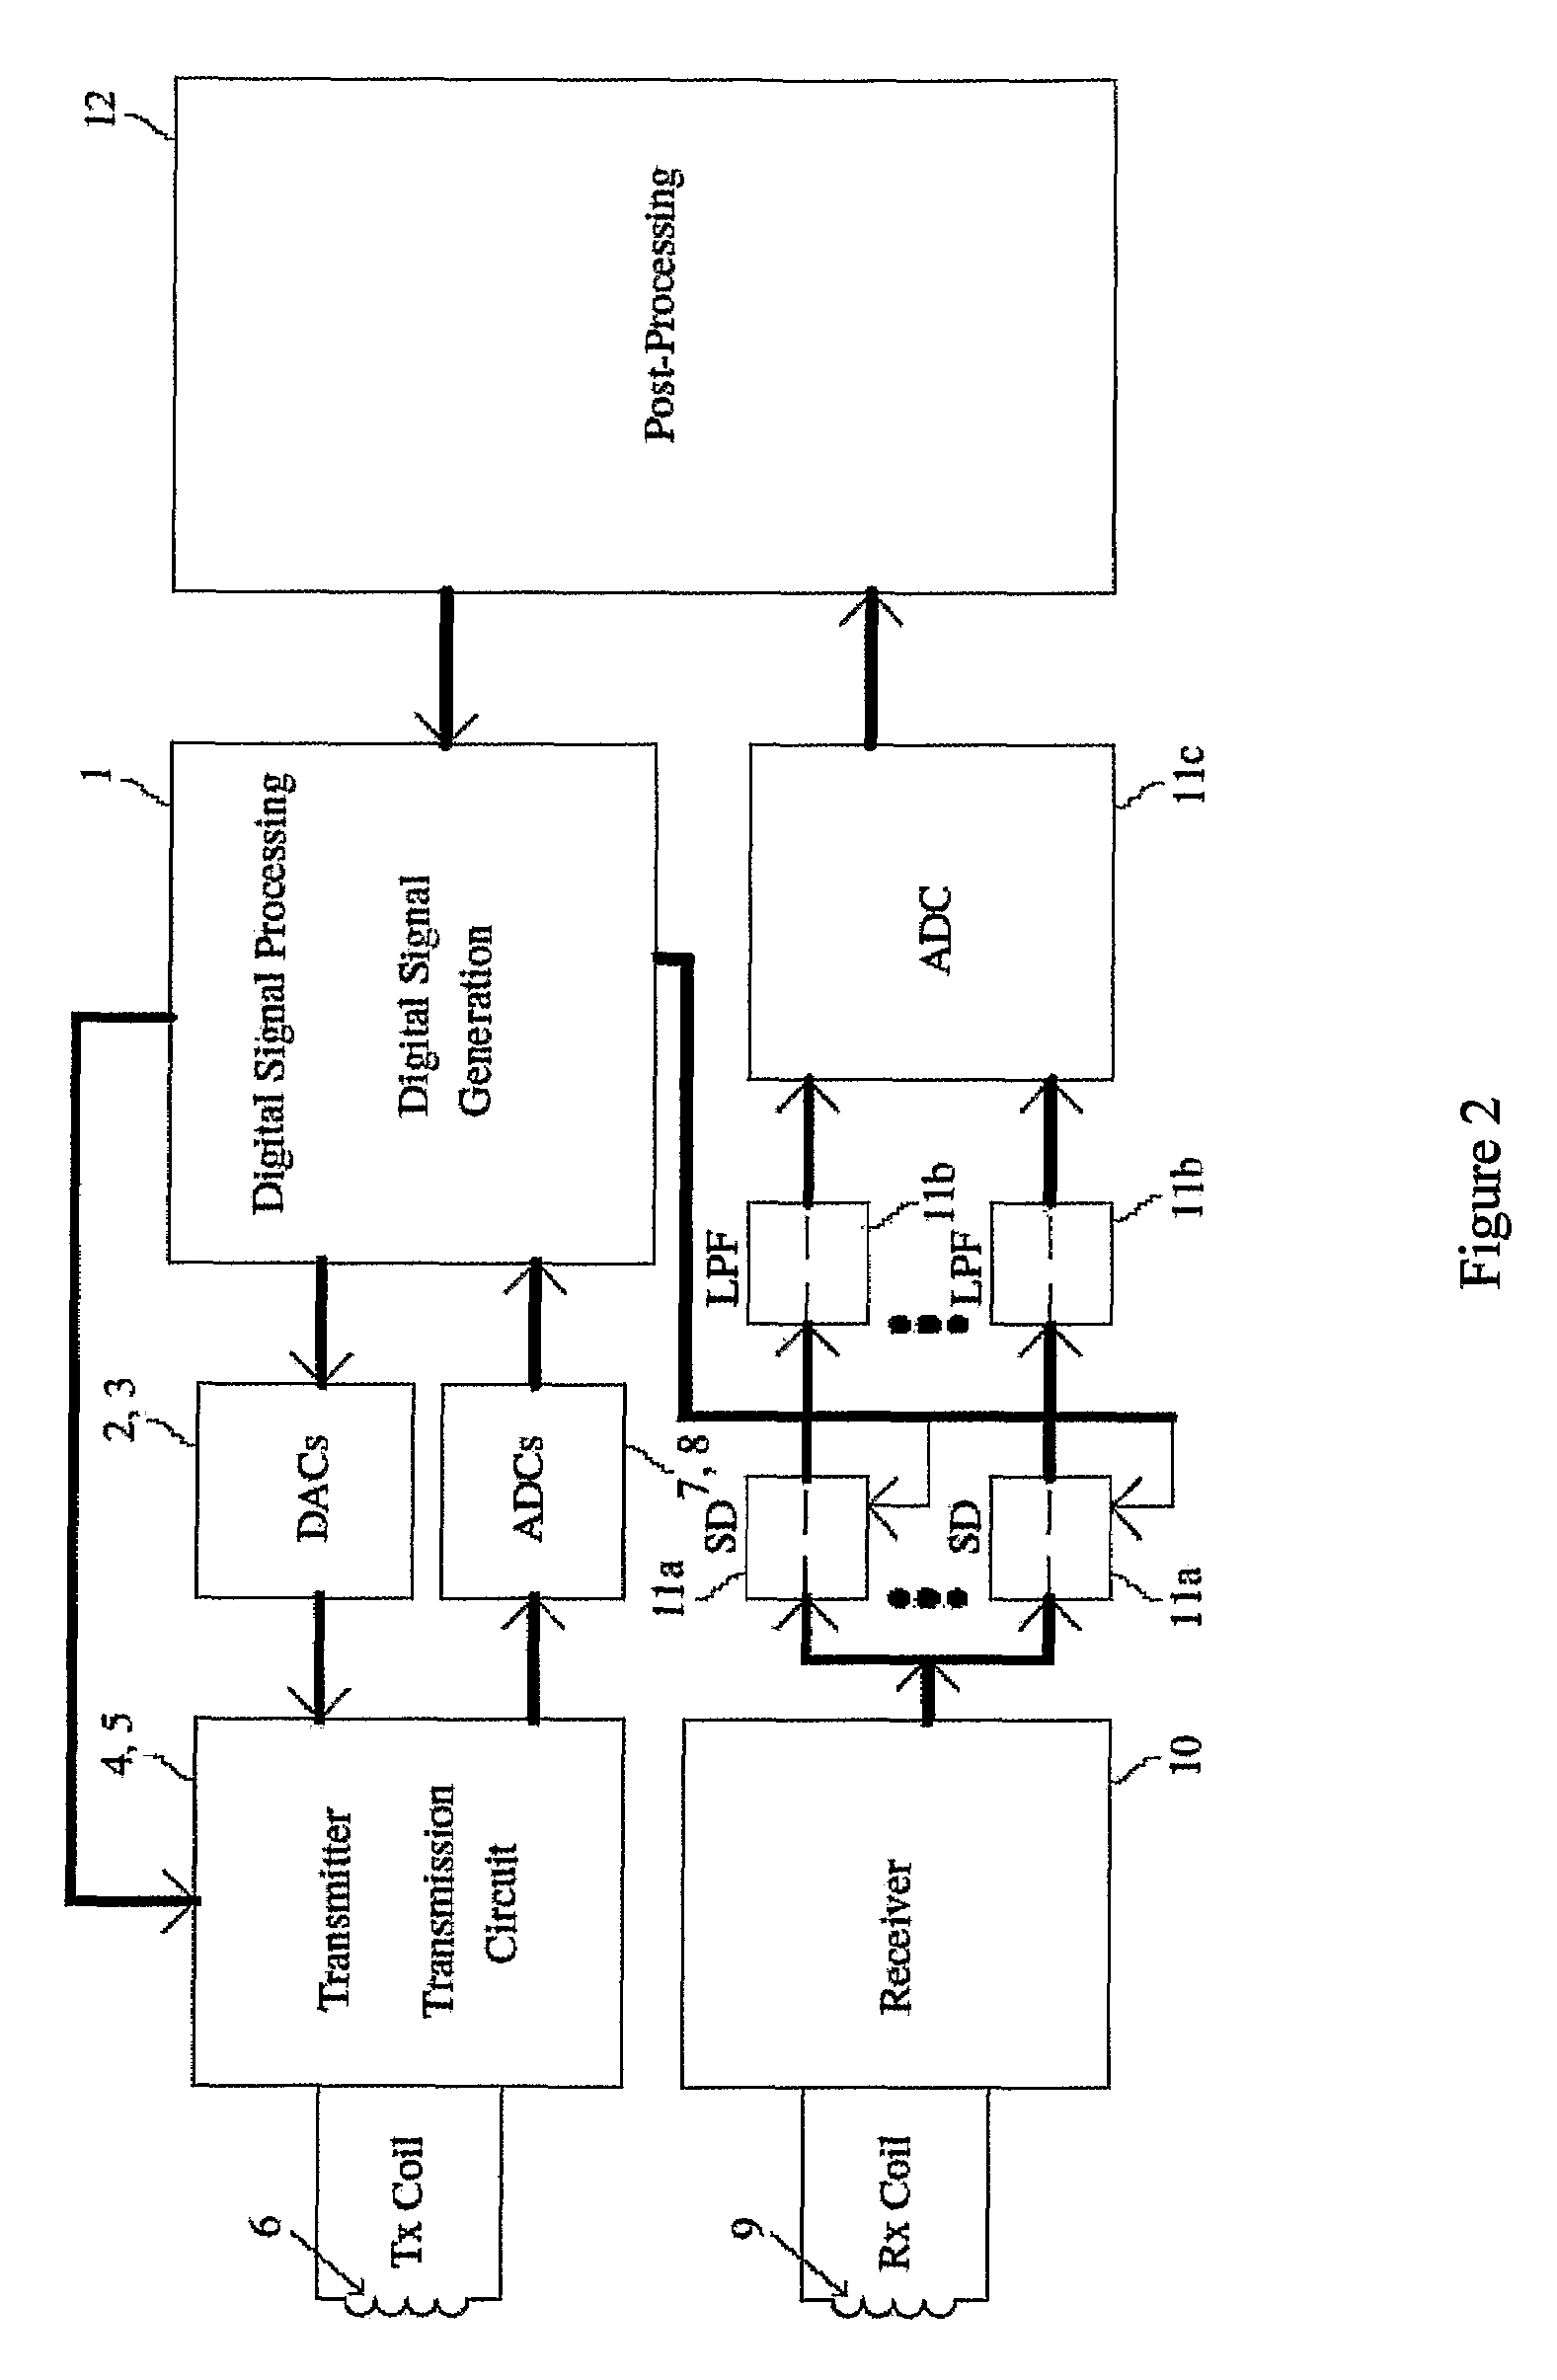 Method and apparatus for metal detection employing digital signal processing